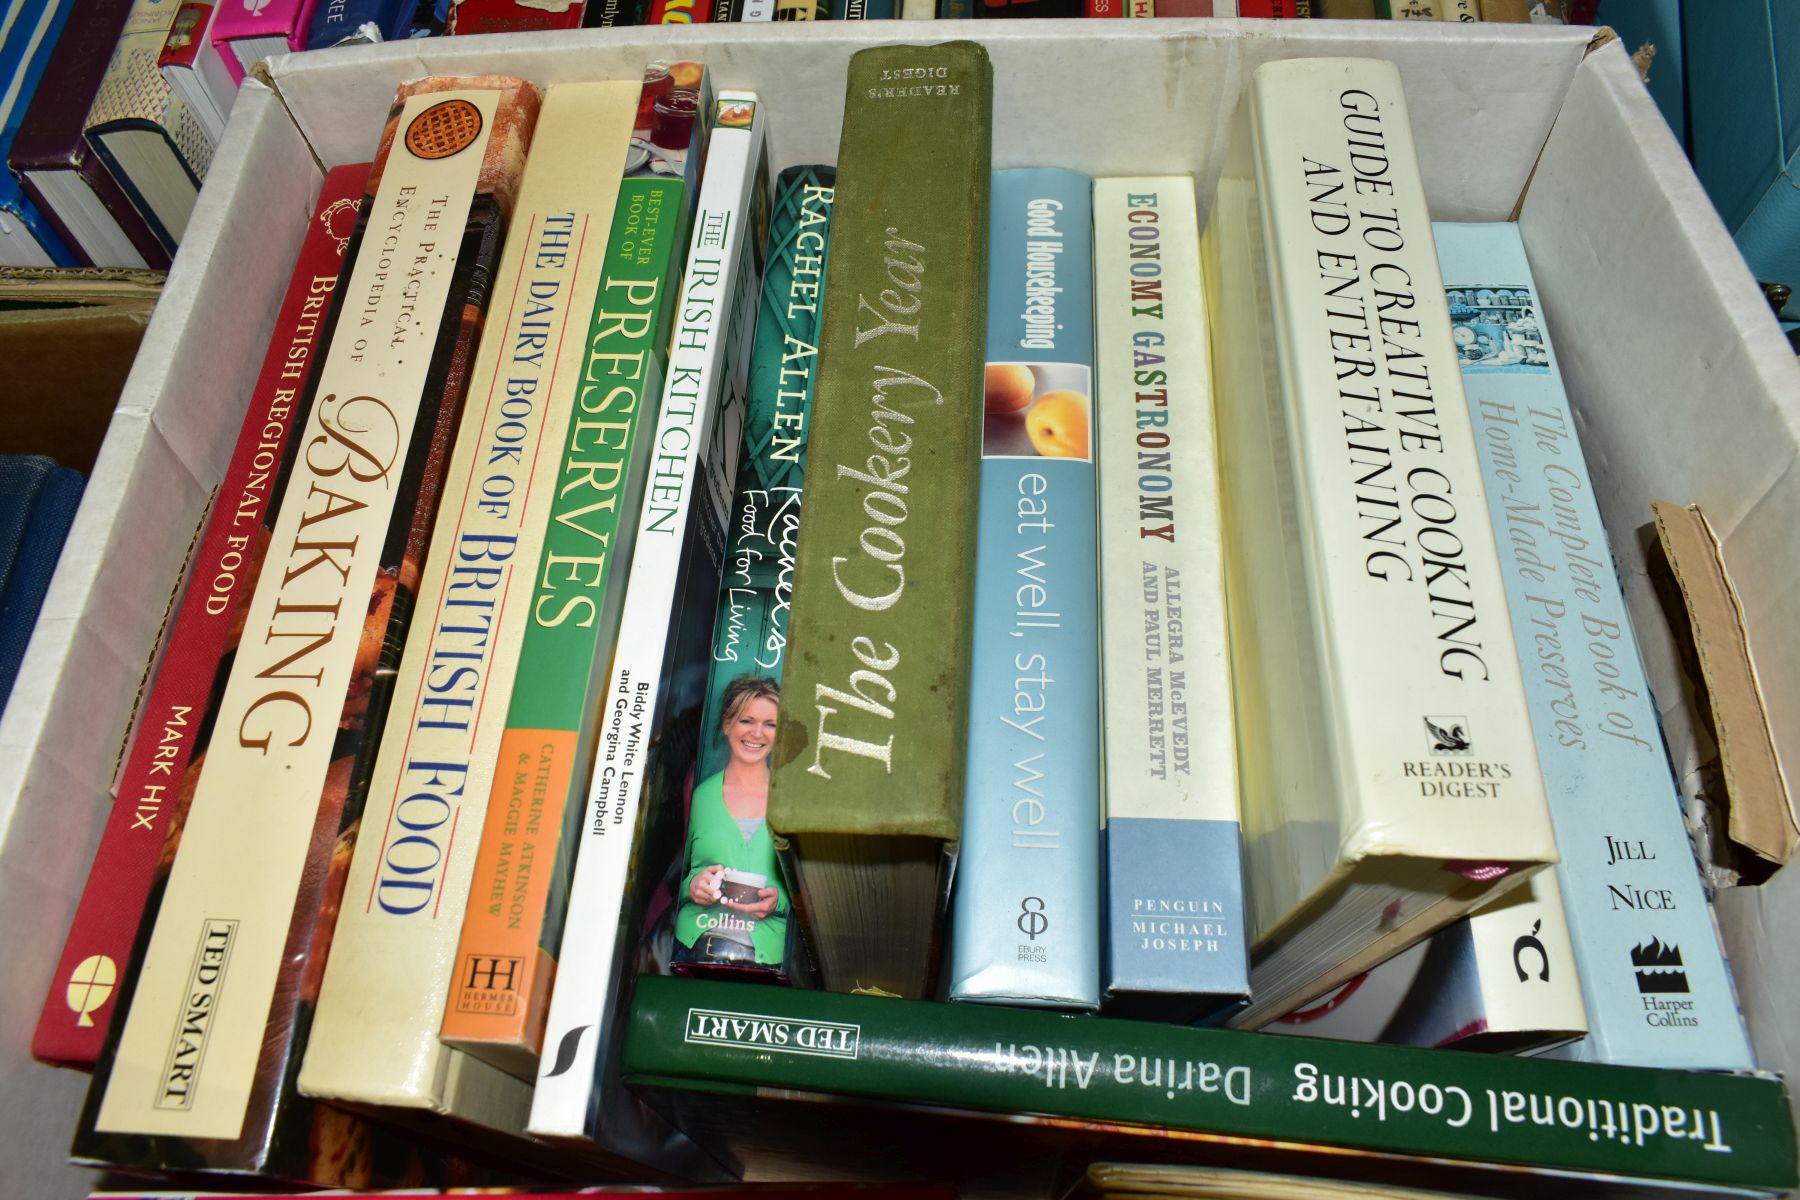 SEVEN BOXES OF BOOKS ETC, subjects include cookery - James Martin, River Cottage, Vefa's Cottage, - Image 9 of 10